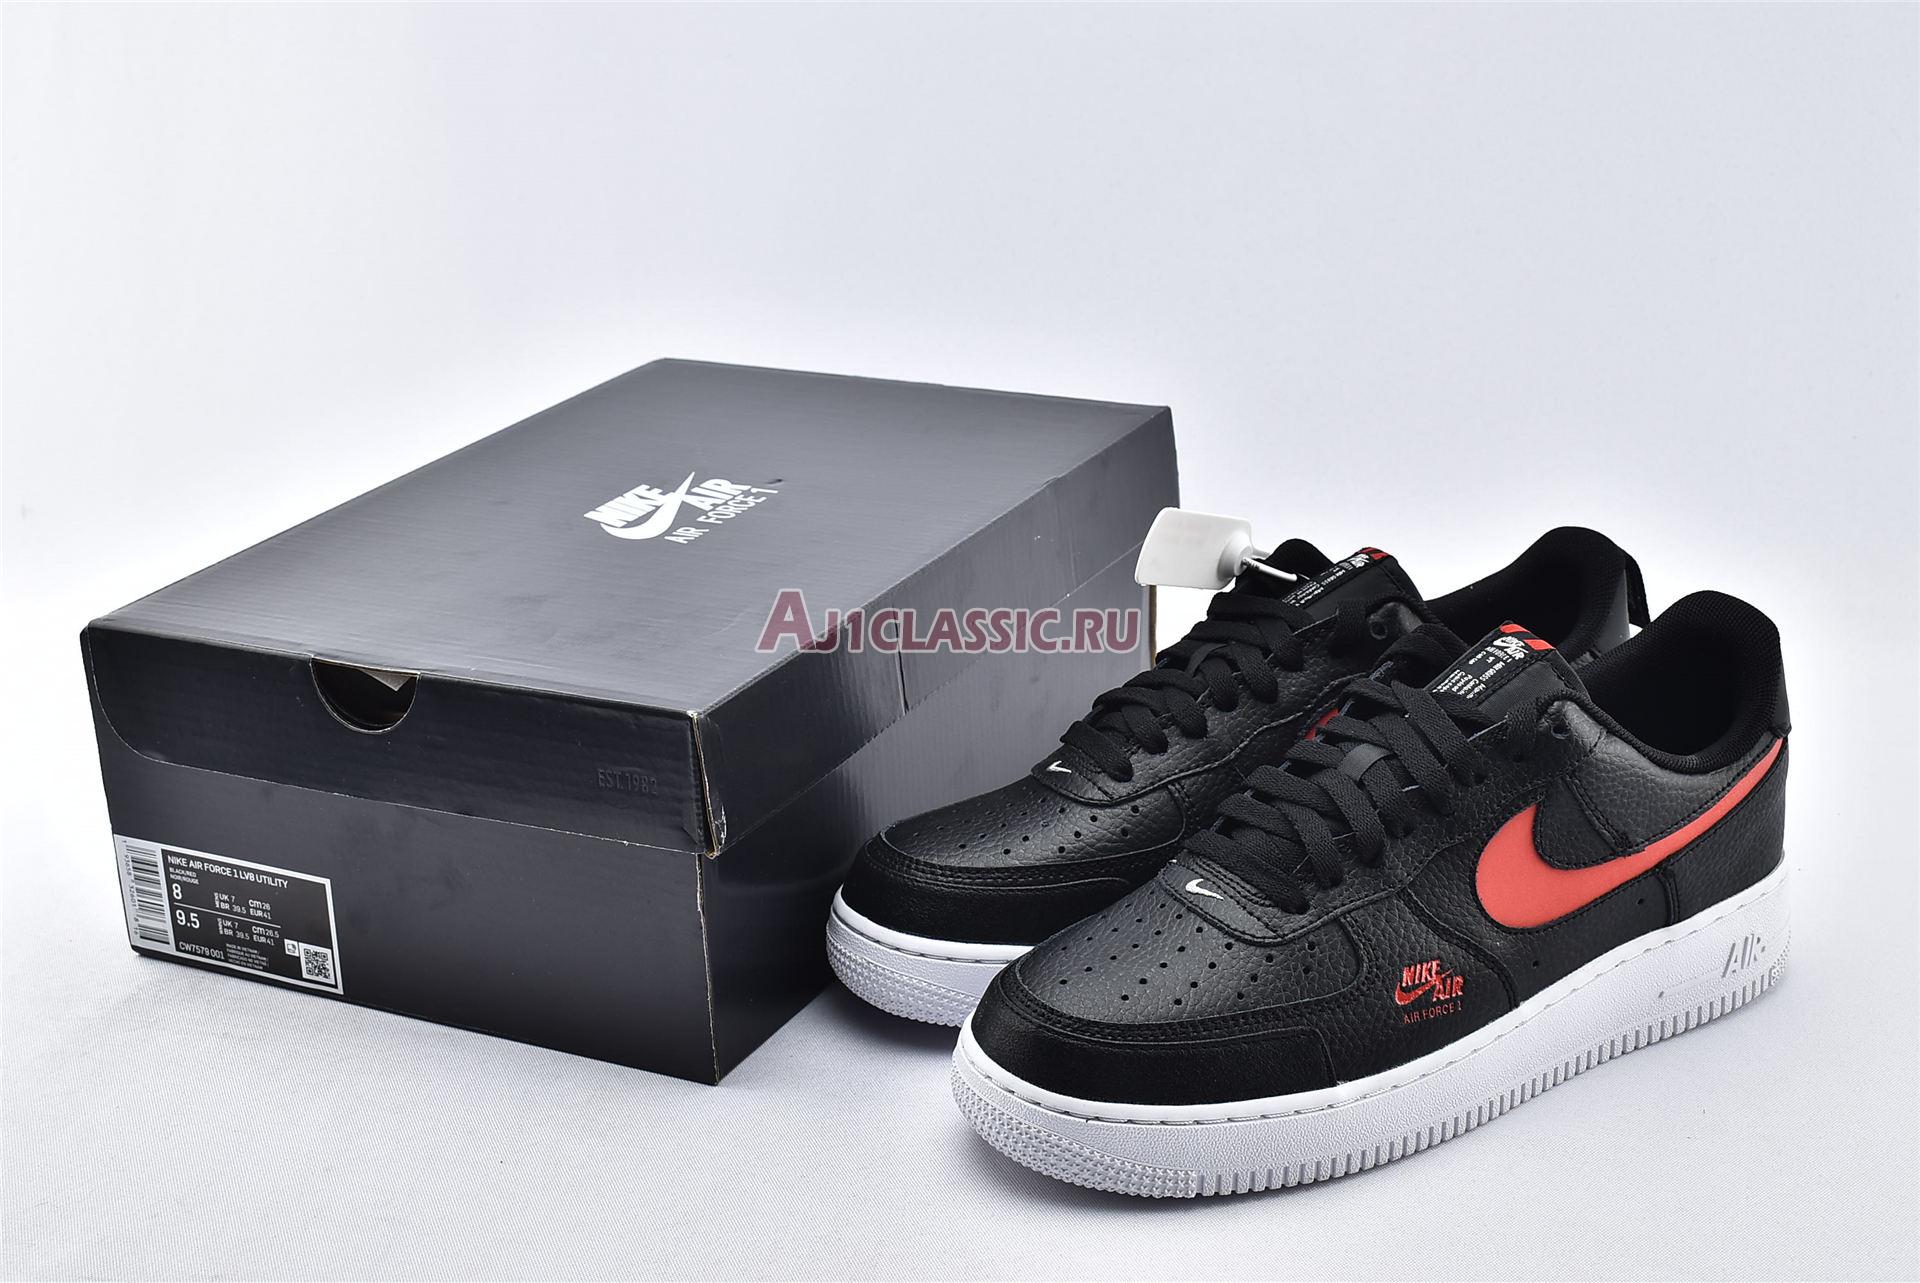 Nike Air Force 1 Low LV8 Utility Bred CW7579-001 Black/University Red-White Sneakers